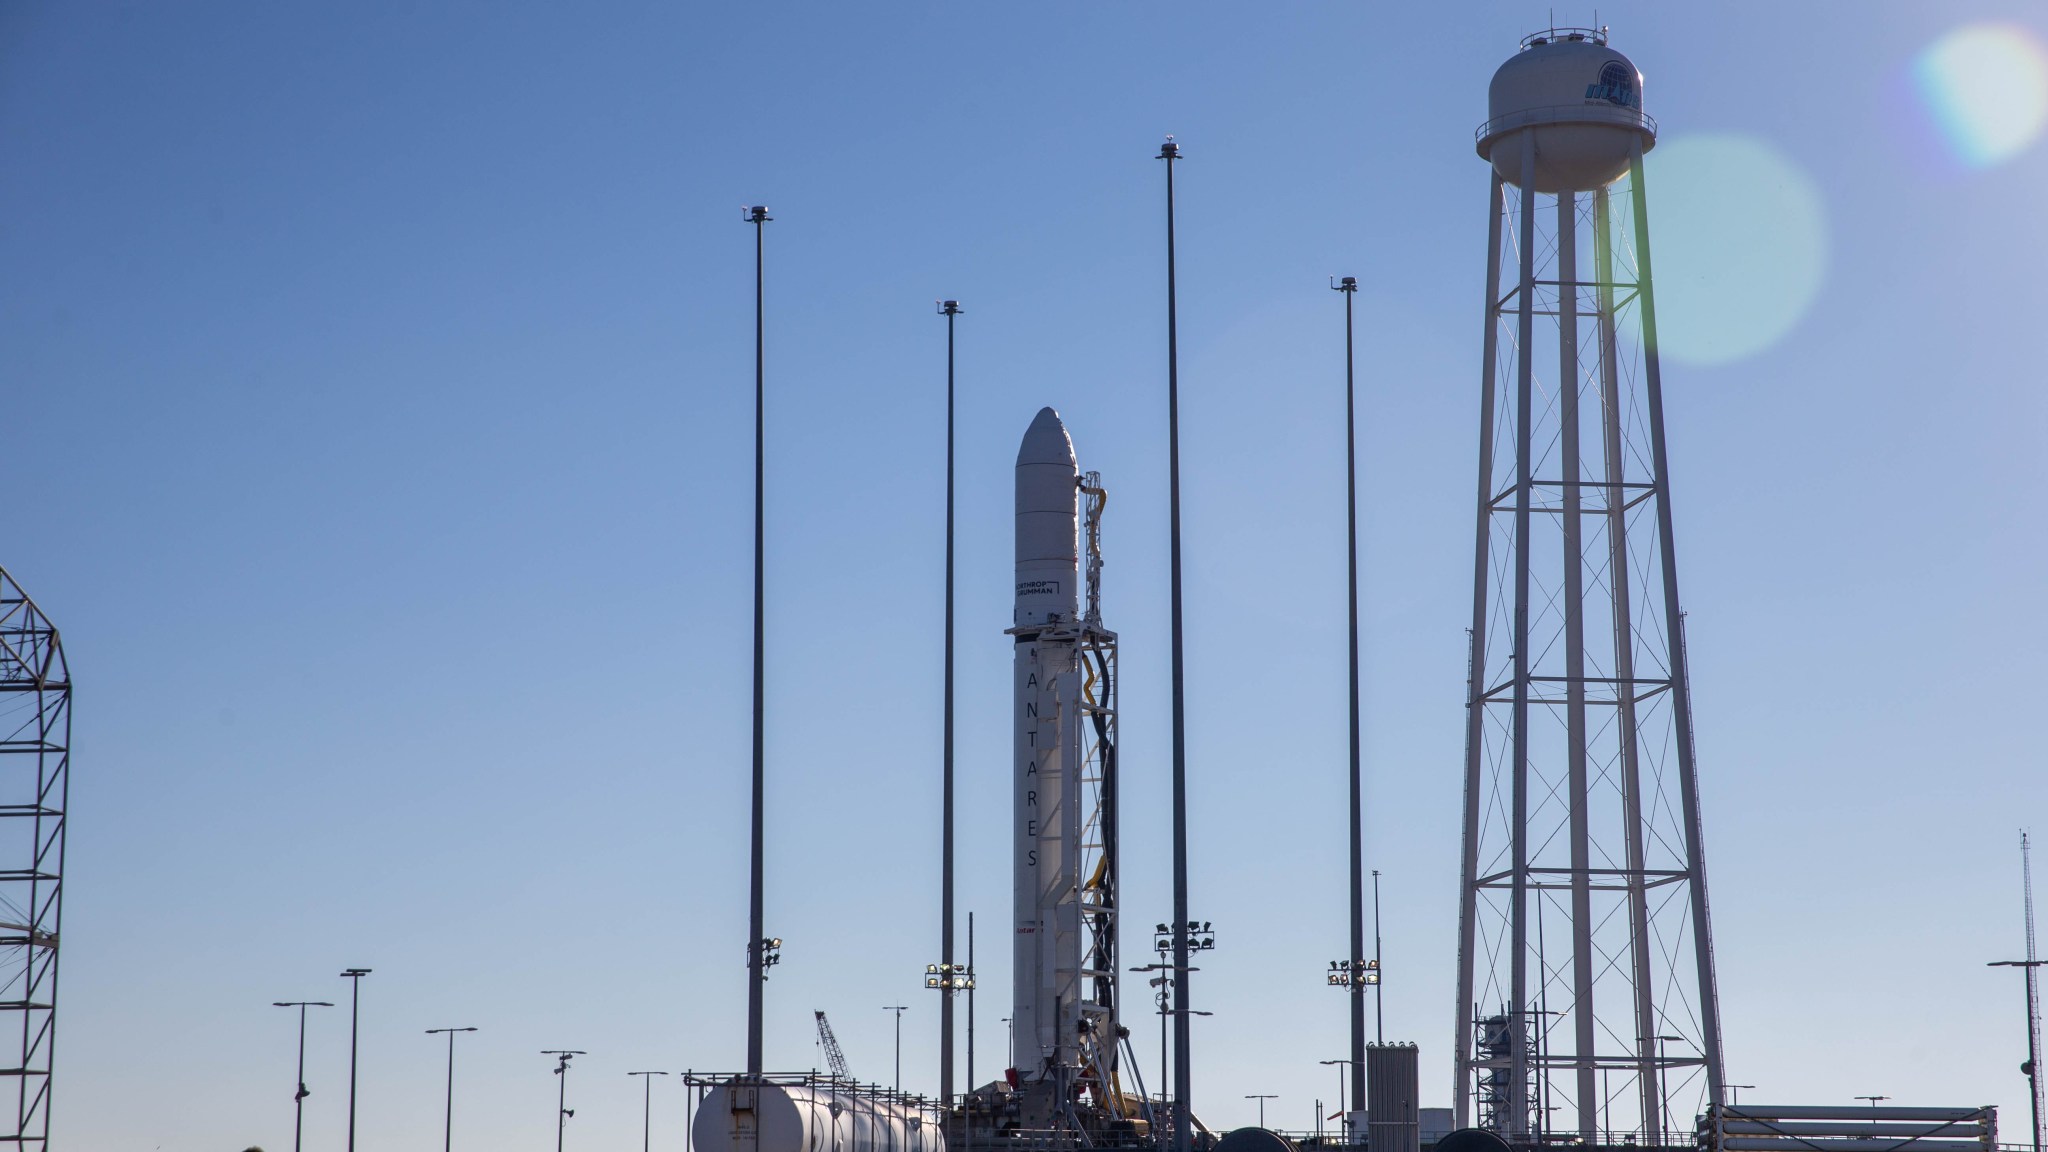 A large, white rocket stands on its launch pad. To the right of the rocket, a water tower with long, spindly white legs has a white dome on top, with a dark logo that’s not fully visible against a bright blue sky.